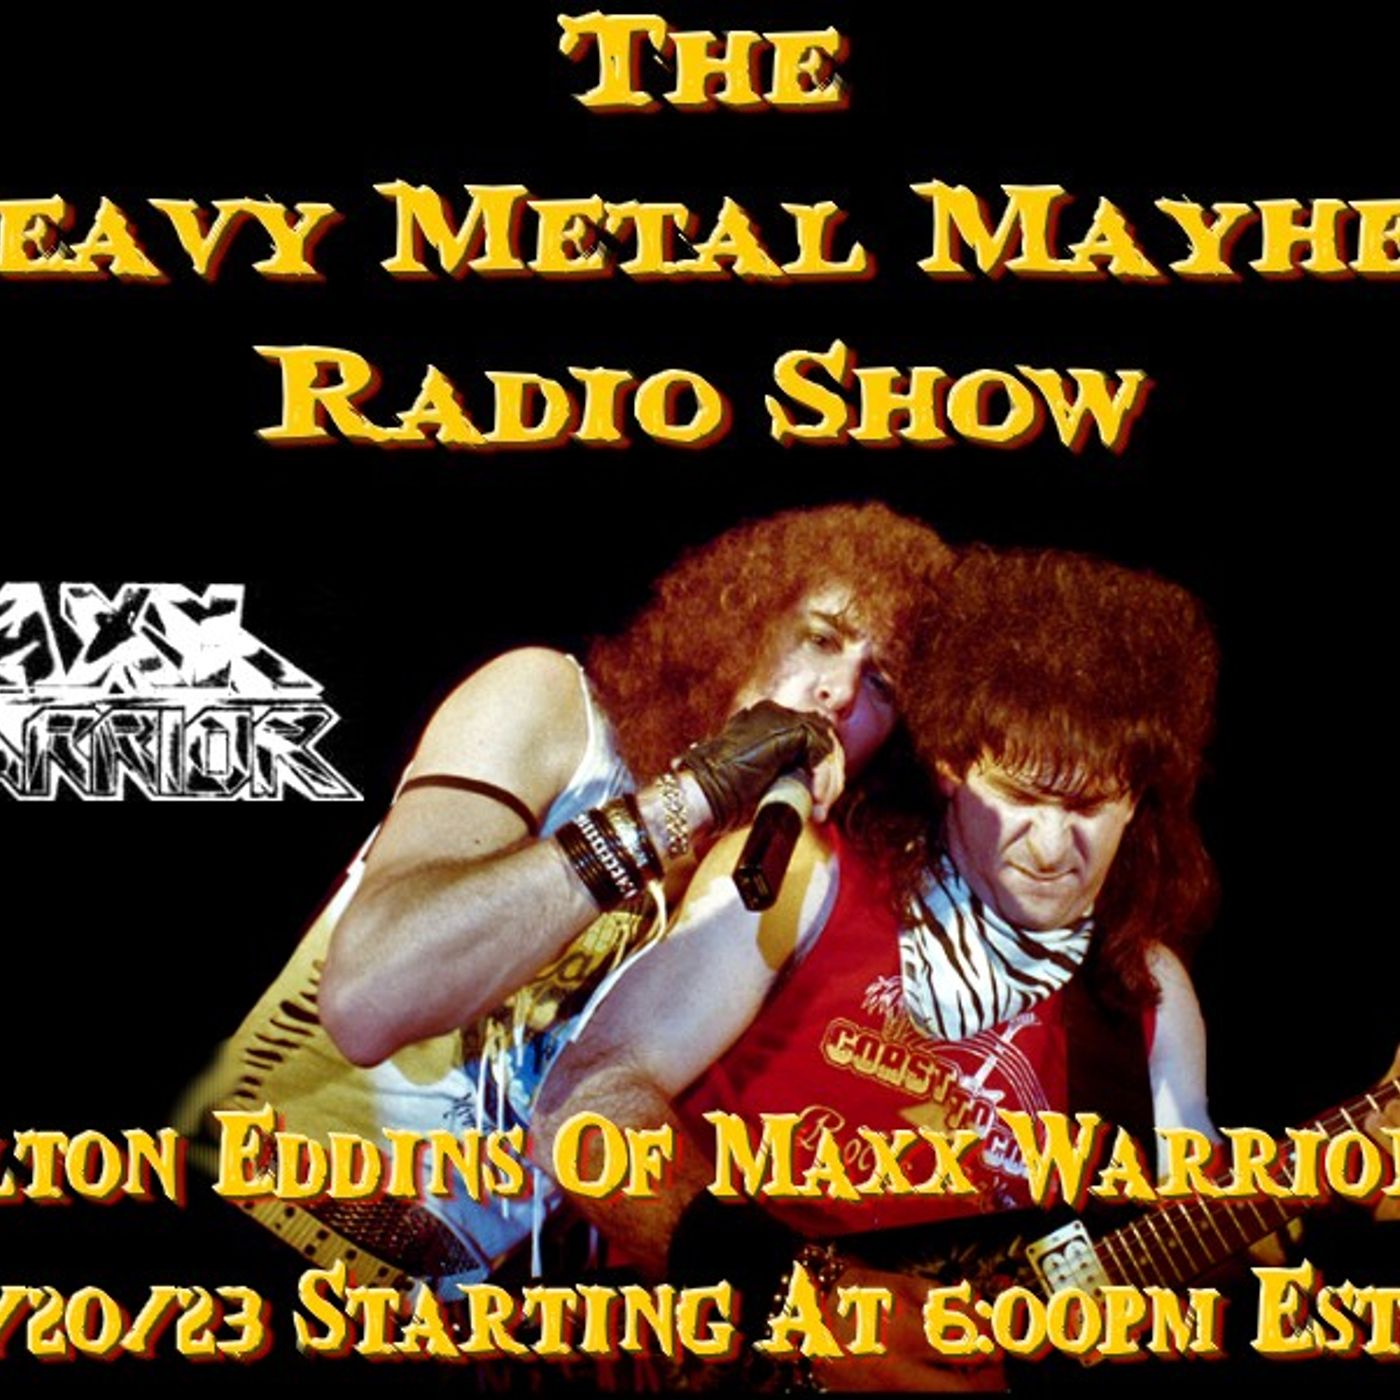 Guest Steve Gaines & Eric Bryan From Anger As Art And Alton Eddins Of Maxx Warrior 8/20/23